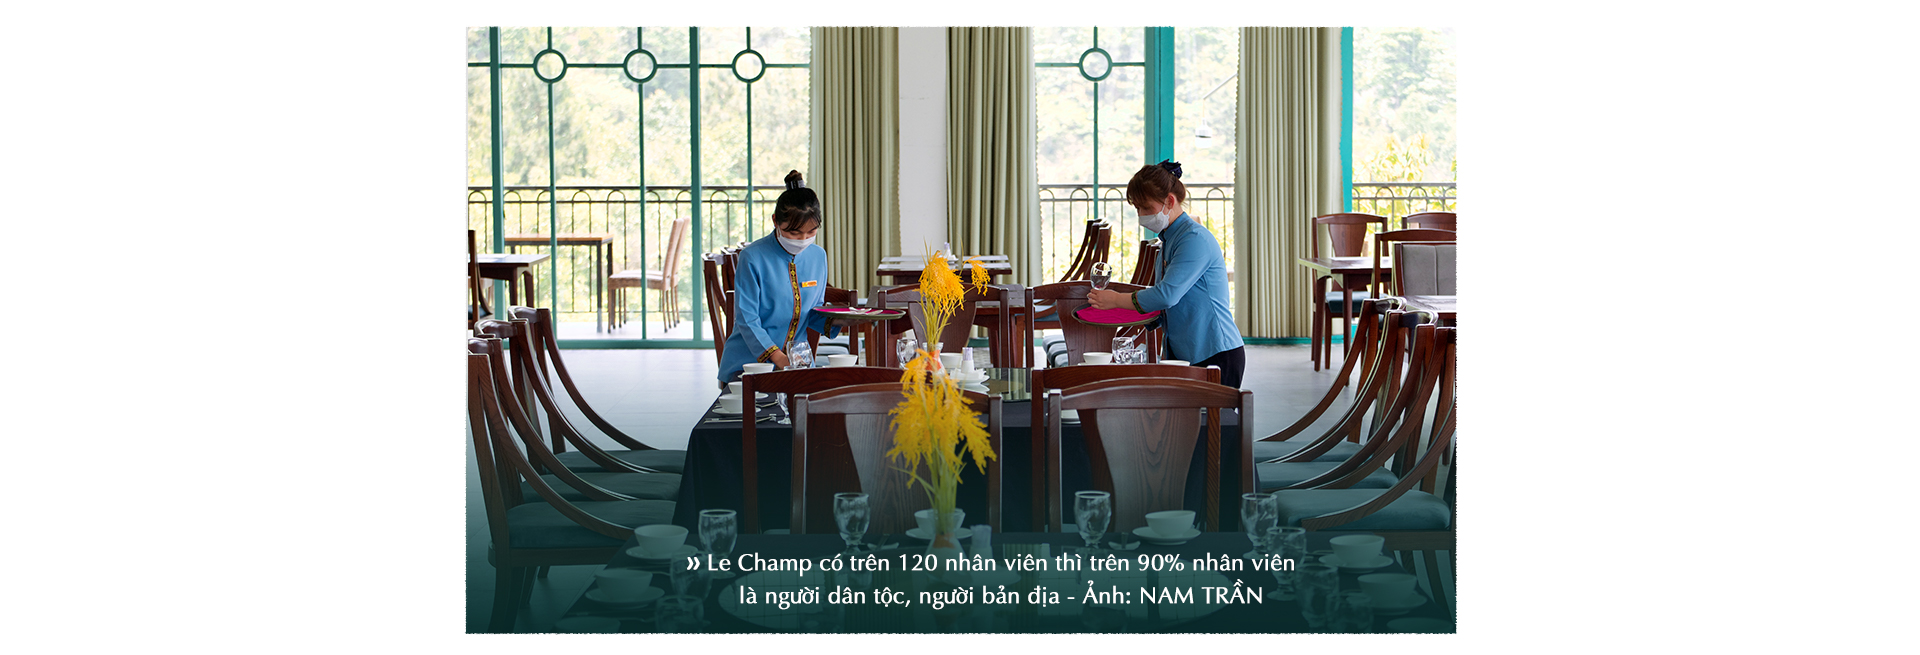 Waitresses prepare a table in the dining hall at Le Champ Tu Le Resort Hot Spring & Spa in Van Chan District, Yen Bai Province, Vietnam. Photo: Nam Tran / Tuoi Tre